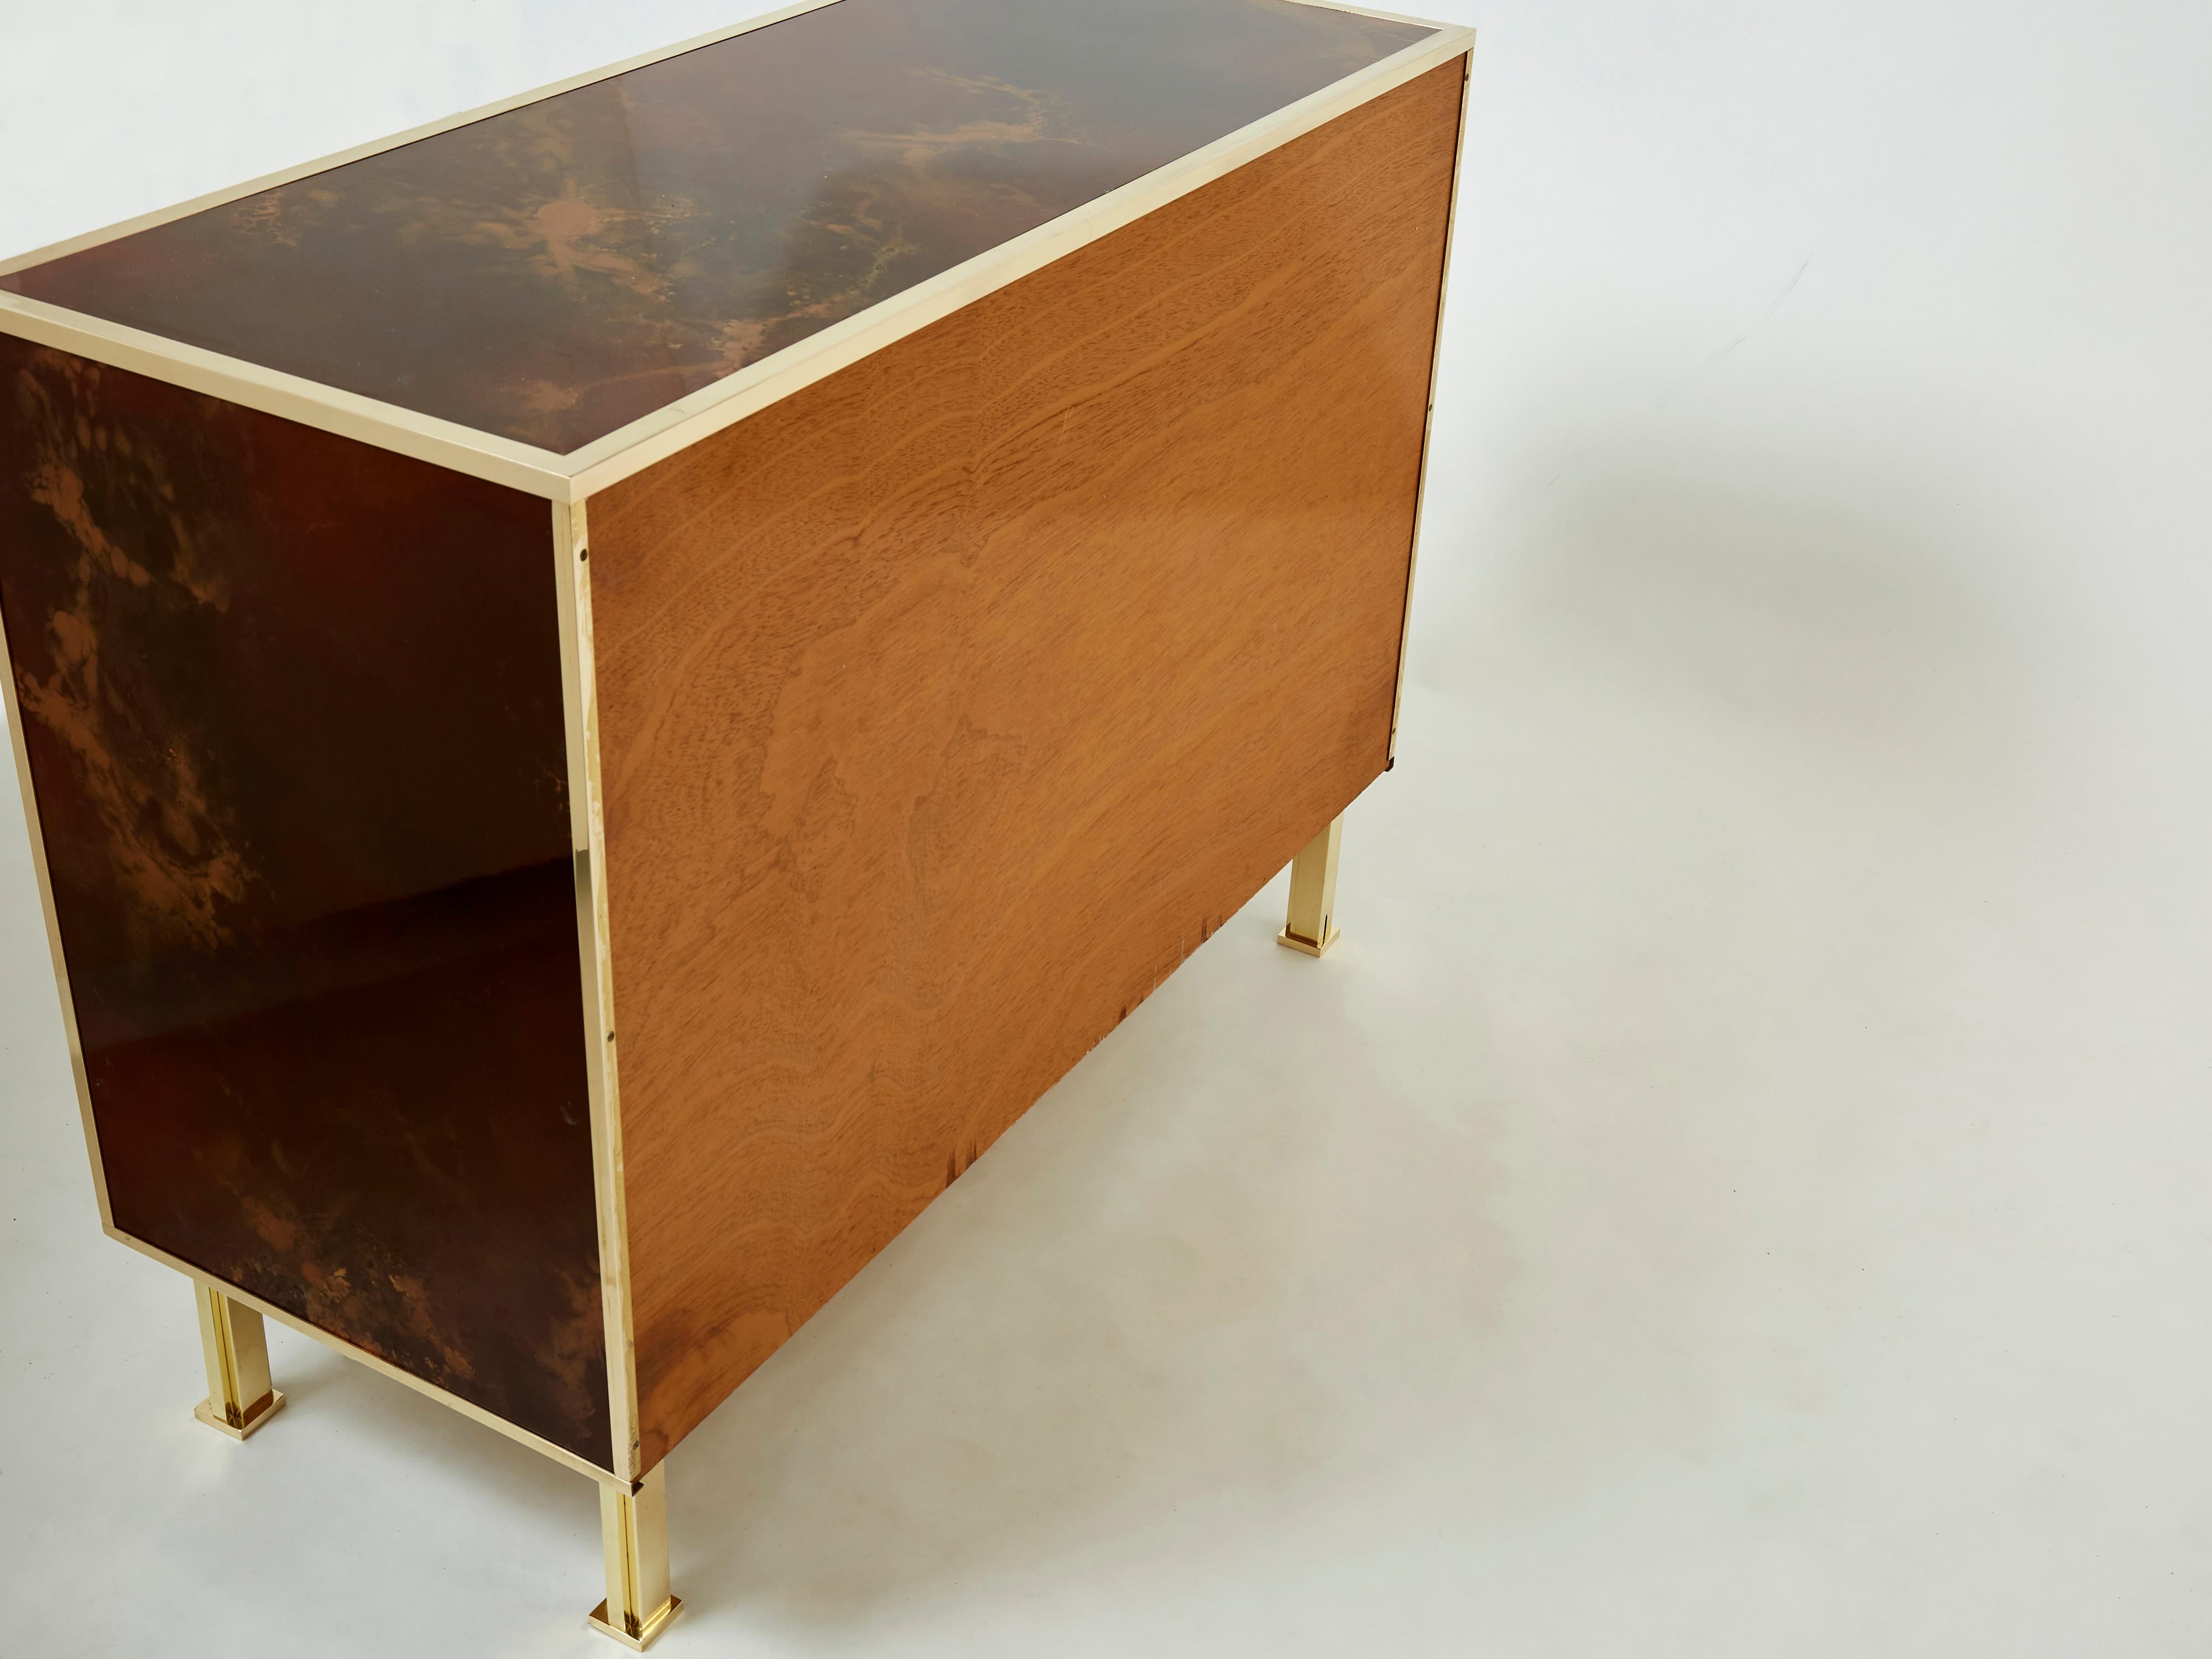 Rare Golden Lacquer and Brass Maison Jansen Chest of Drawers 1970s For Sale 5